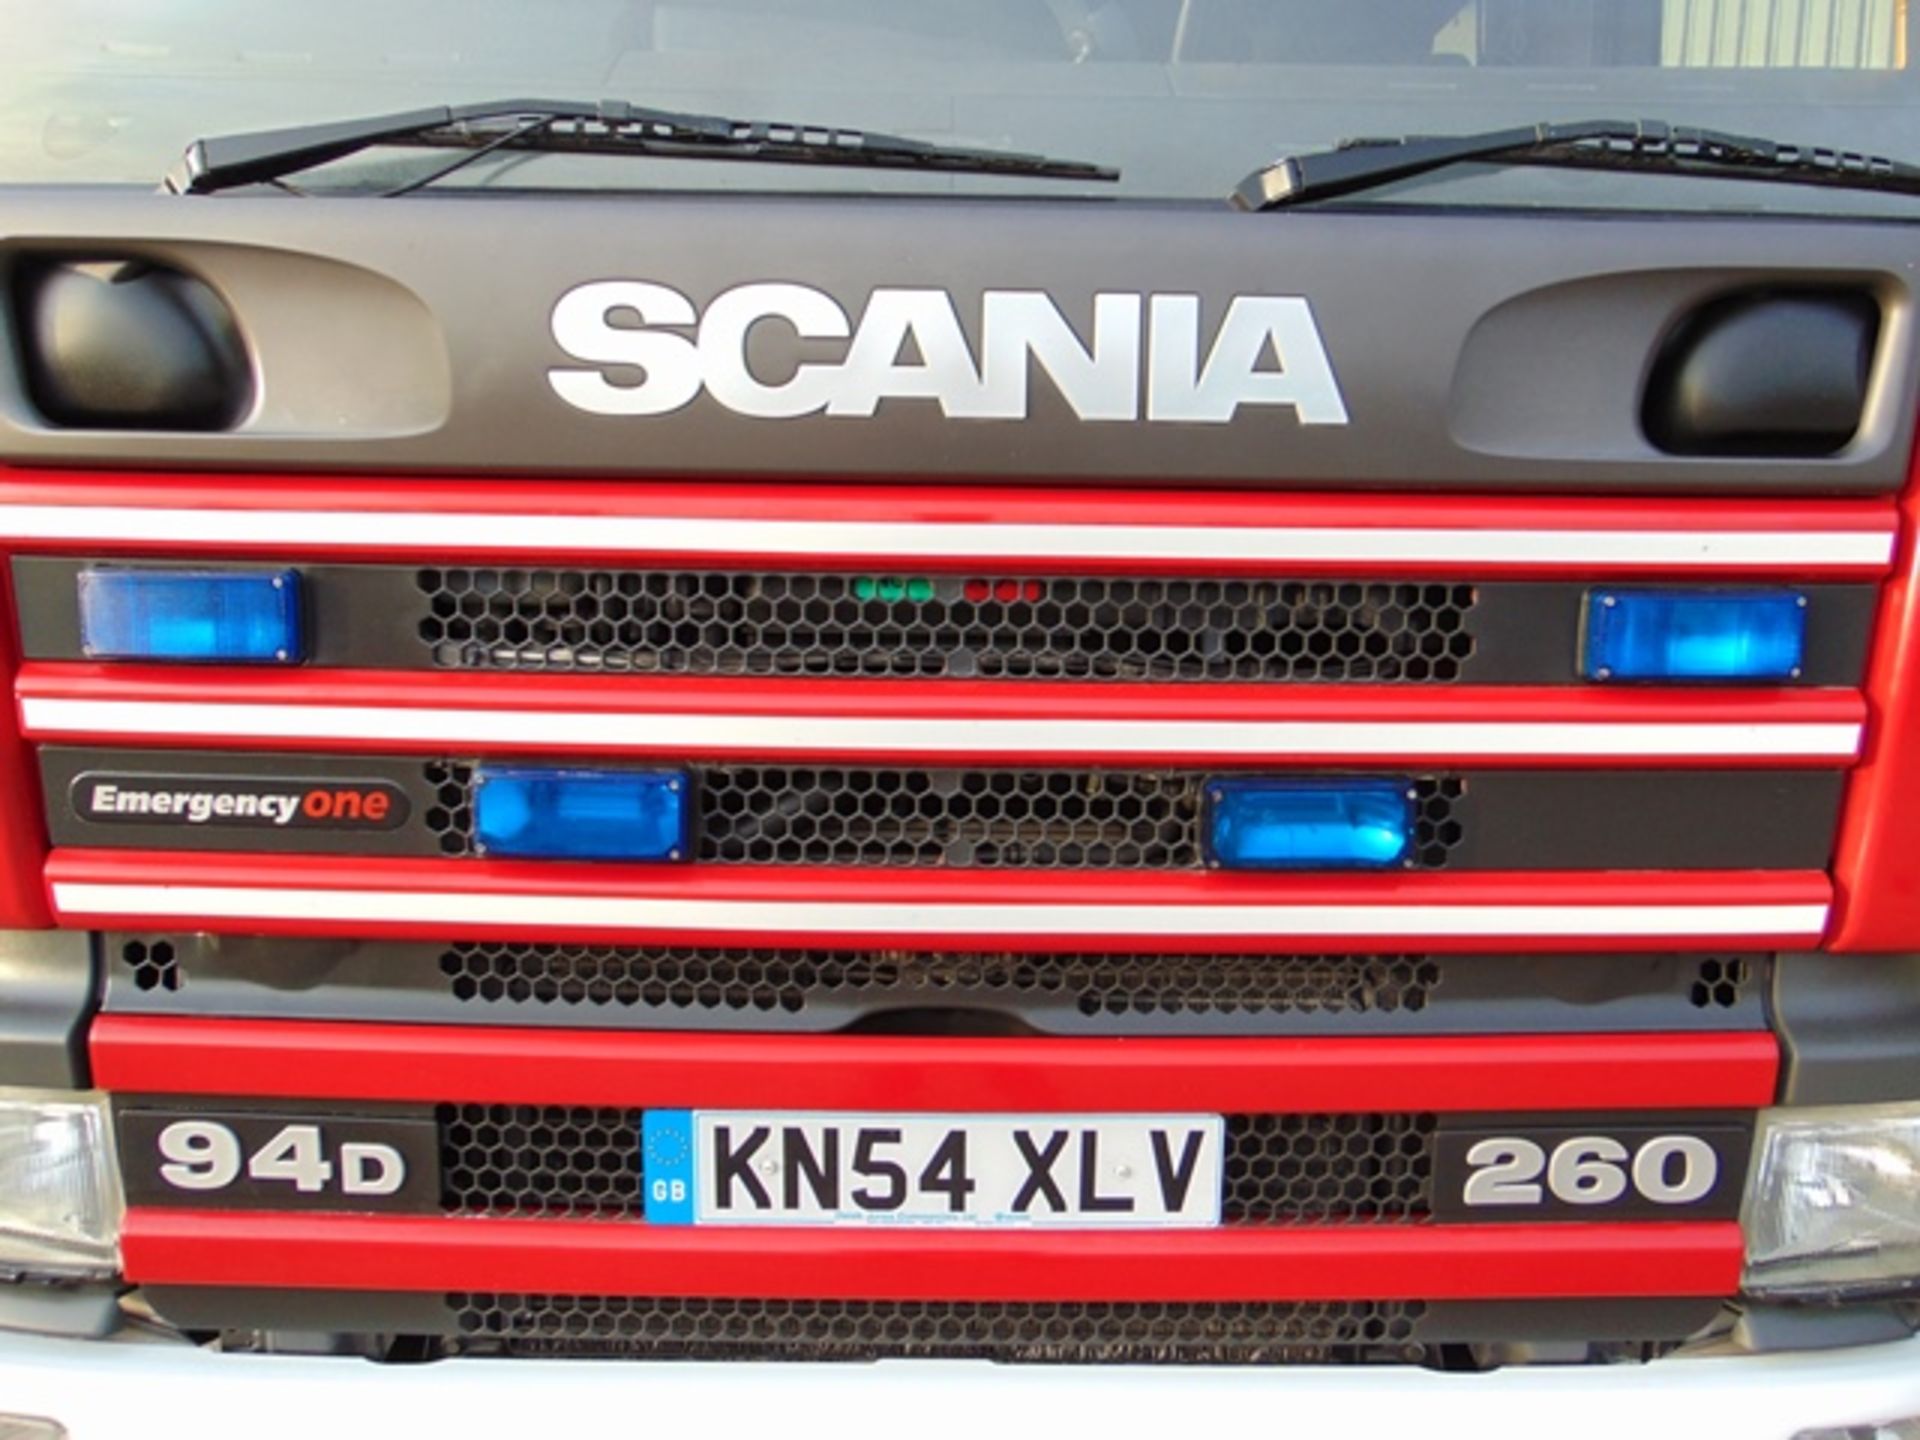 Scania 94D 260 / Emergency One Fire Engine ONLY 60,588km! - Image 29 of 31